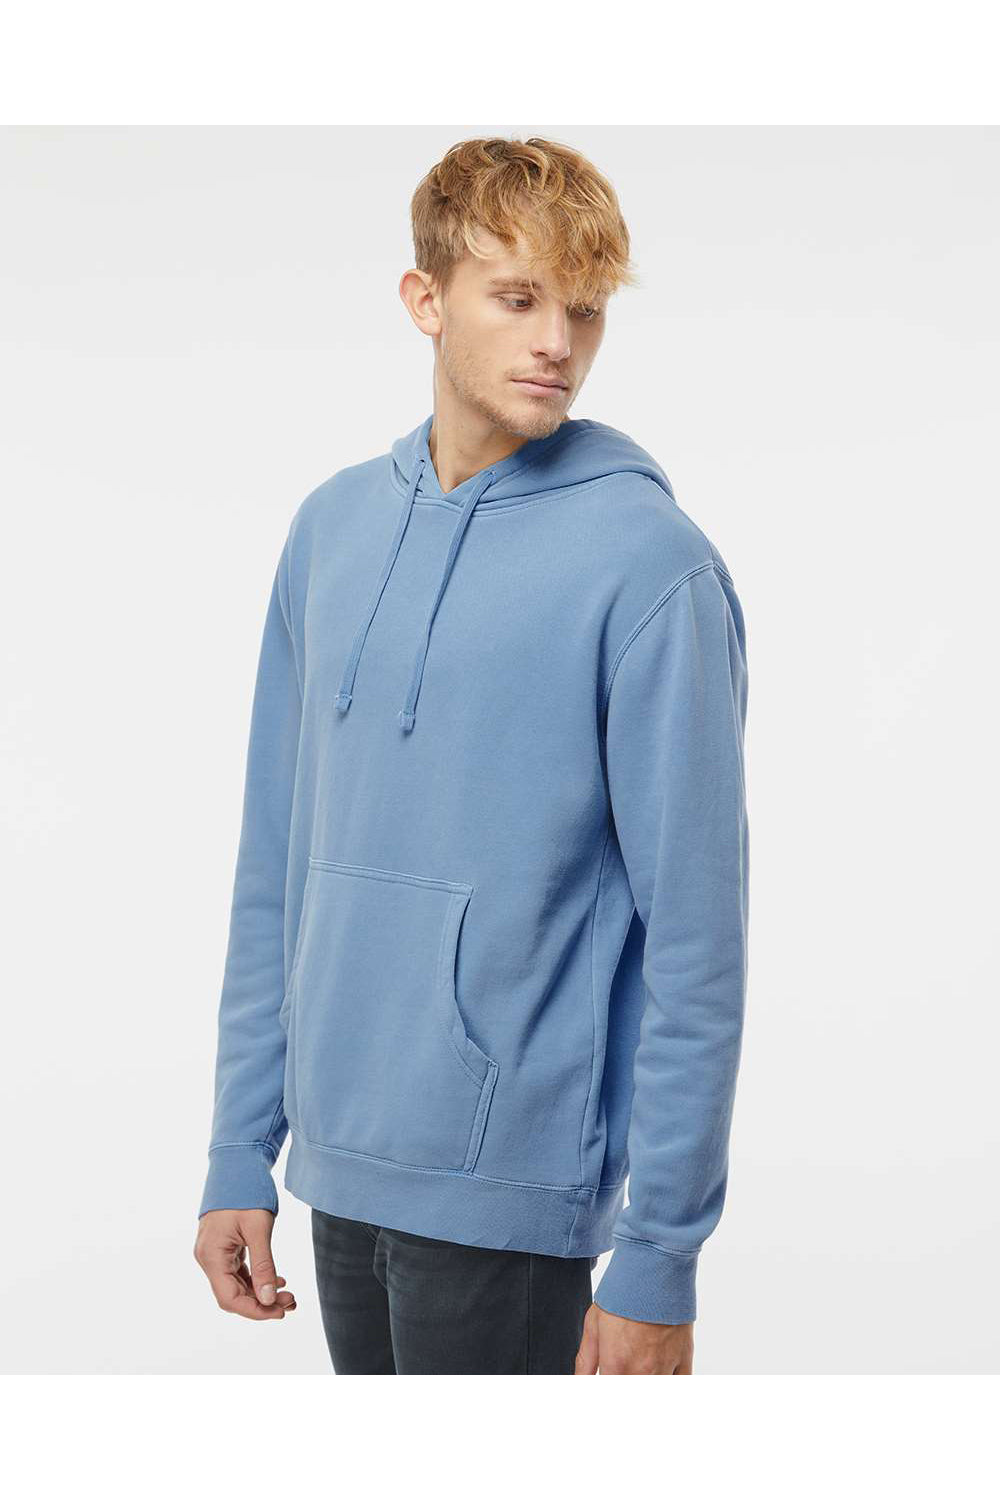 Independent Trading Co. PRM4500 Mens Pigment Dyed Hooded Sweatshirt Hoodie Light Blue Model Side